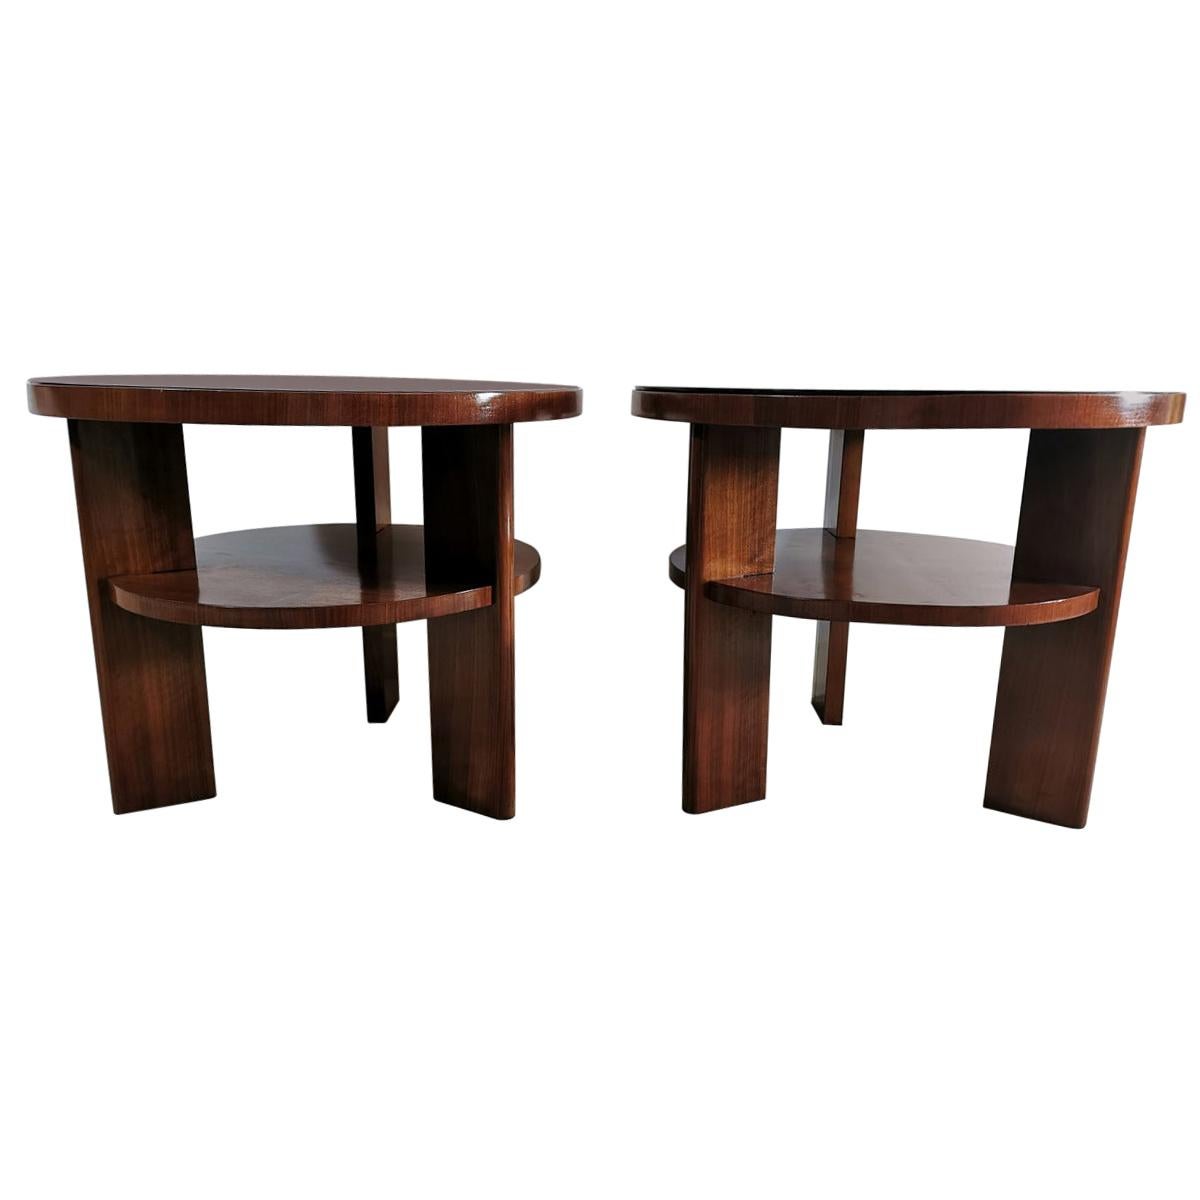 Art Deco Pair of Italian Coffee Tables in Walnut with Black Glass Top